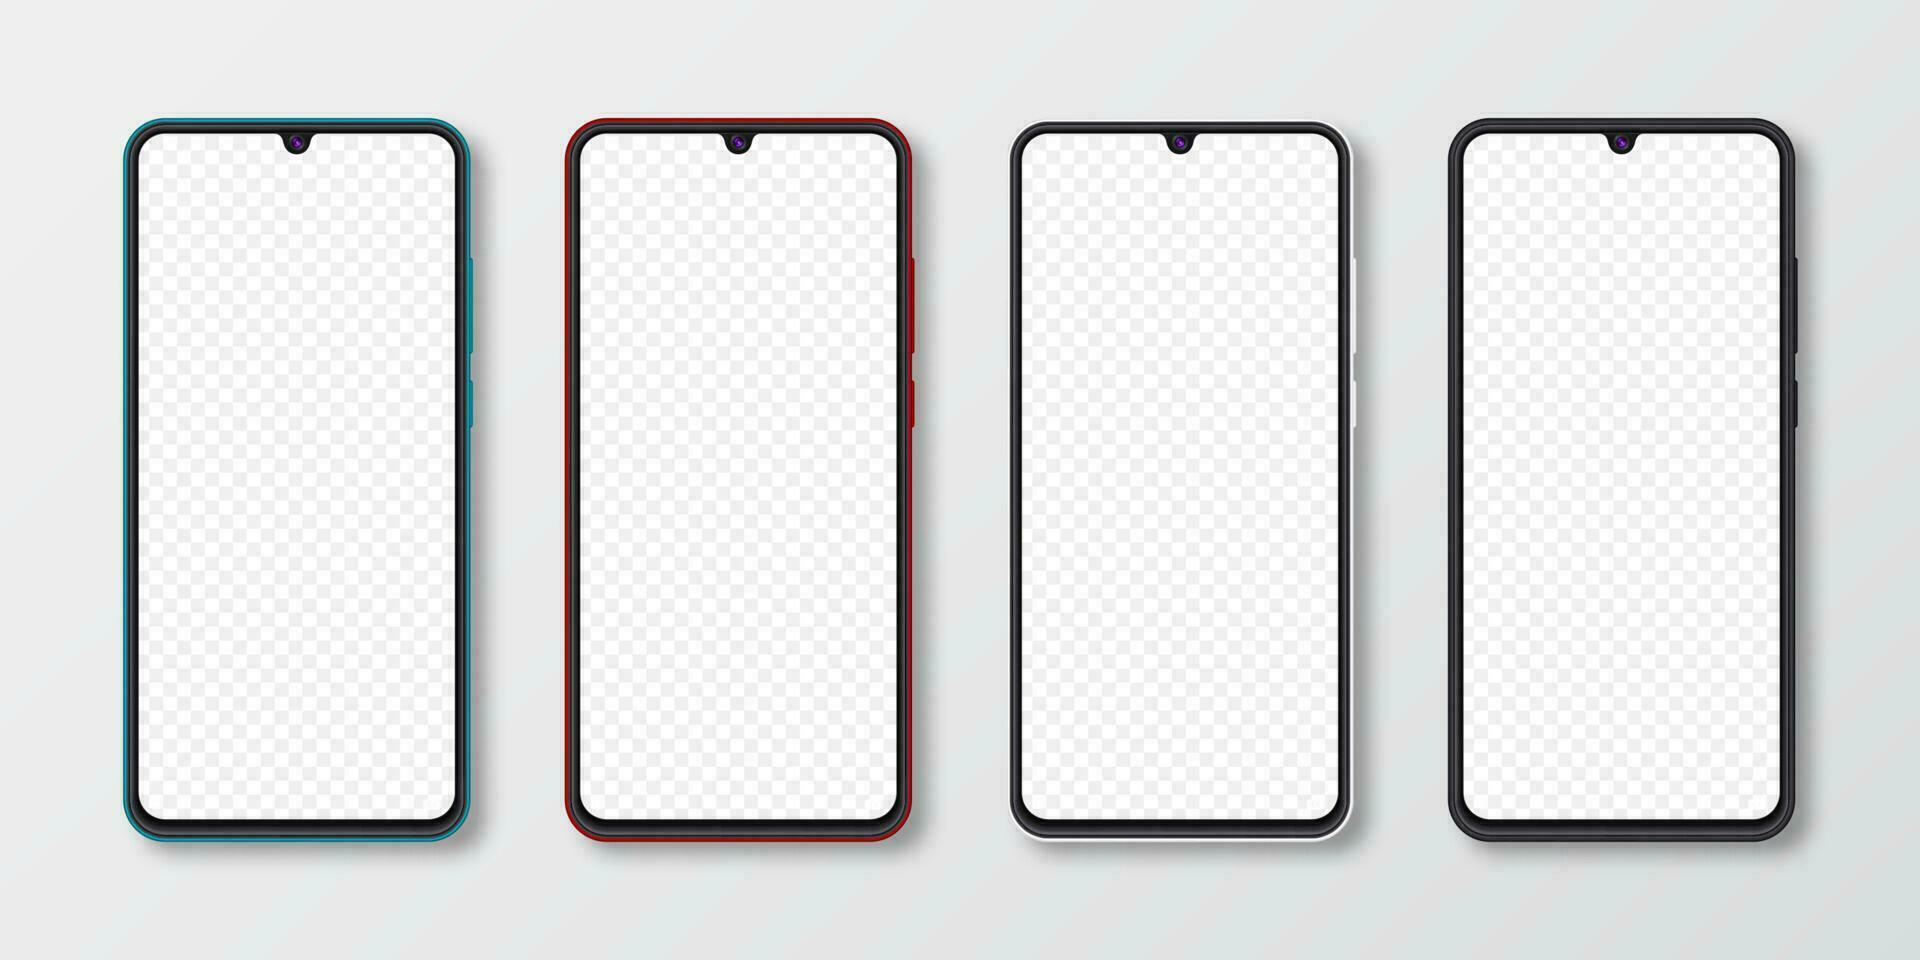 Realistic smartphone mock up set. Mobile phone display isolated on white gray background. 3D template illustration. Vector illustration